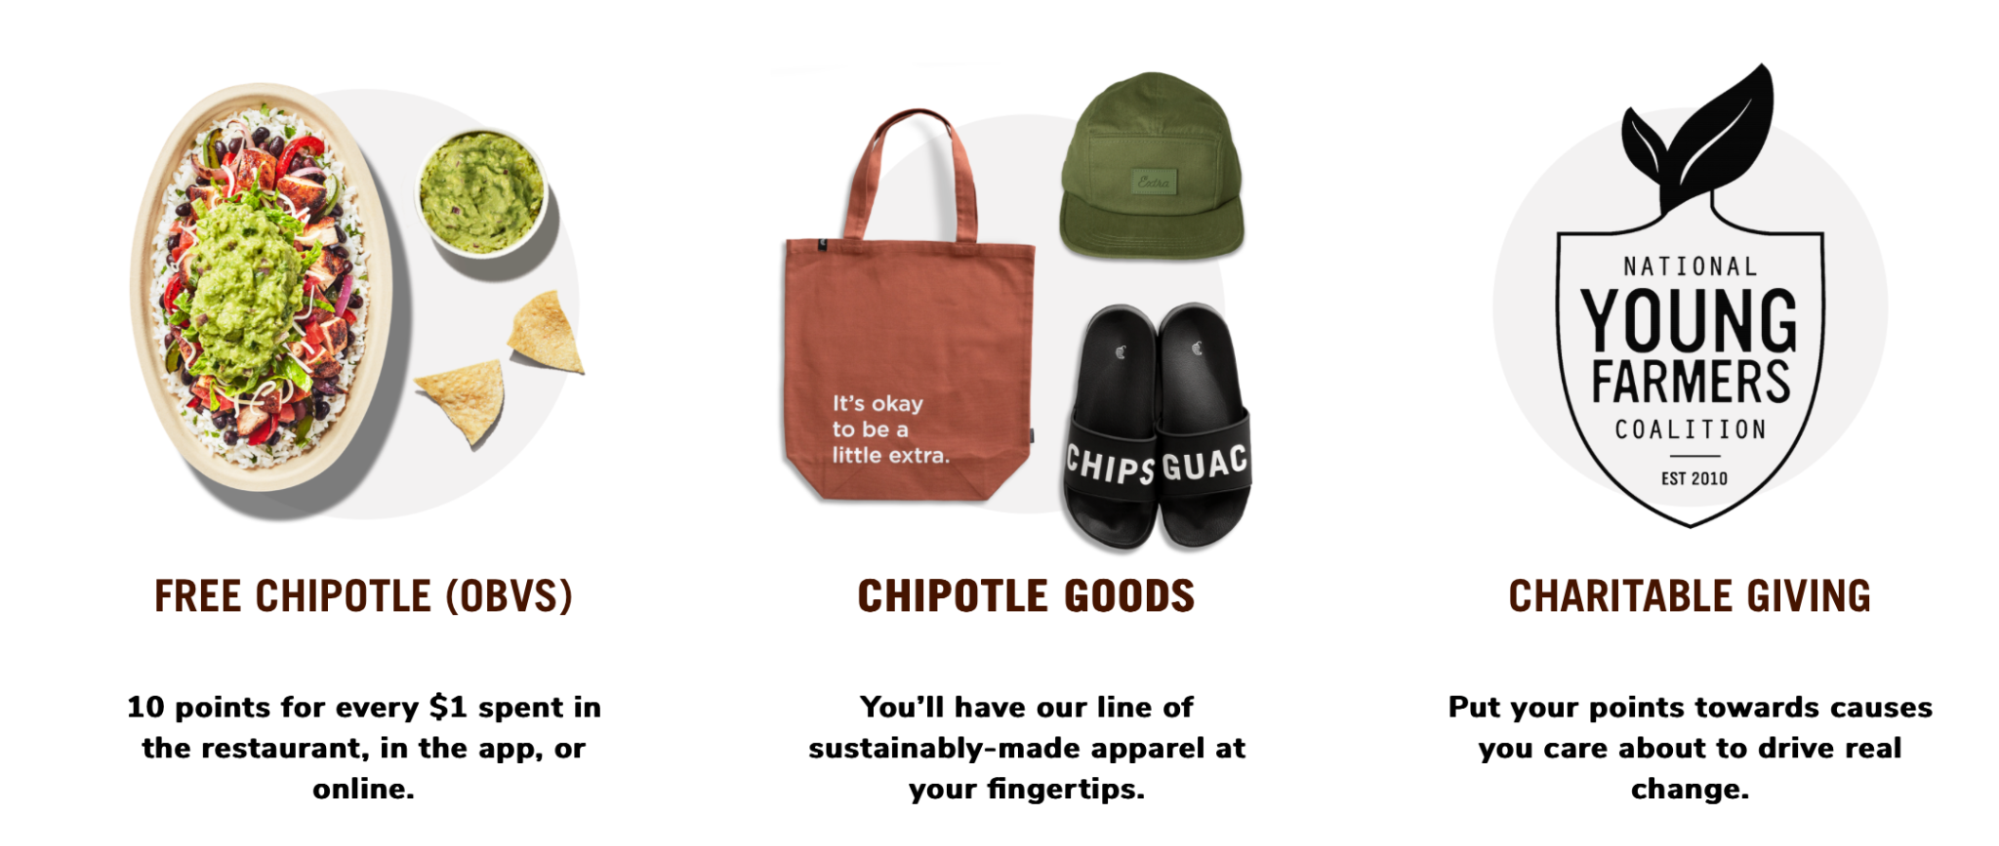 Exclusive perks Chipotle offers